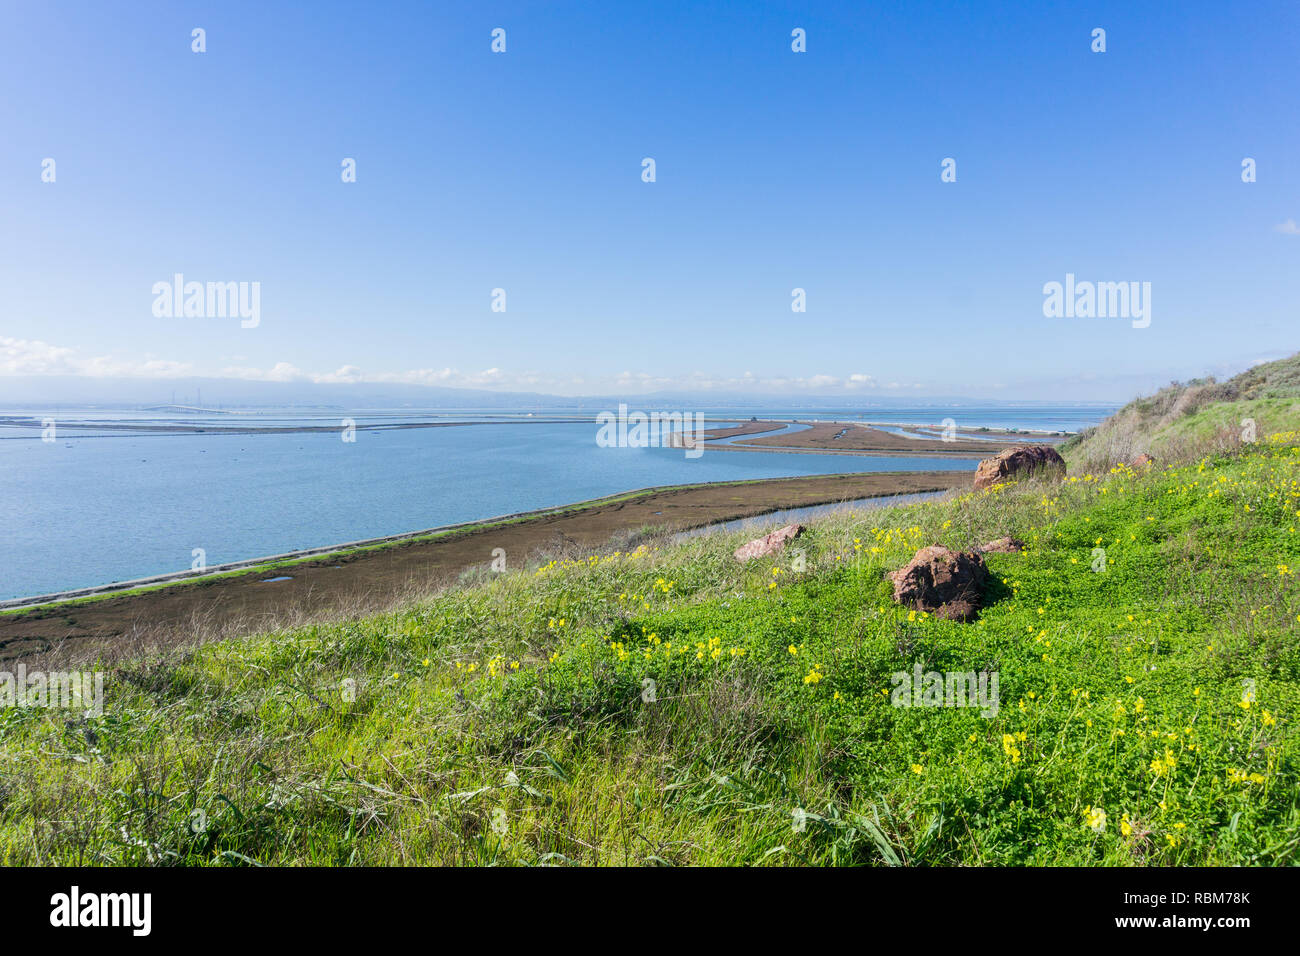 Green meadow and bermuda buttercup flowers in Don Edwards wildlife refuge, Dumbarton bridge in the background, Fremont, San Francisco bay area, Califo Stock Photo